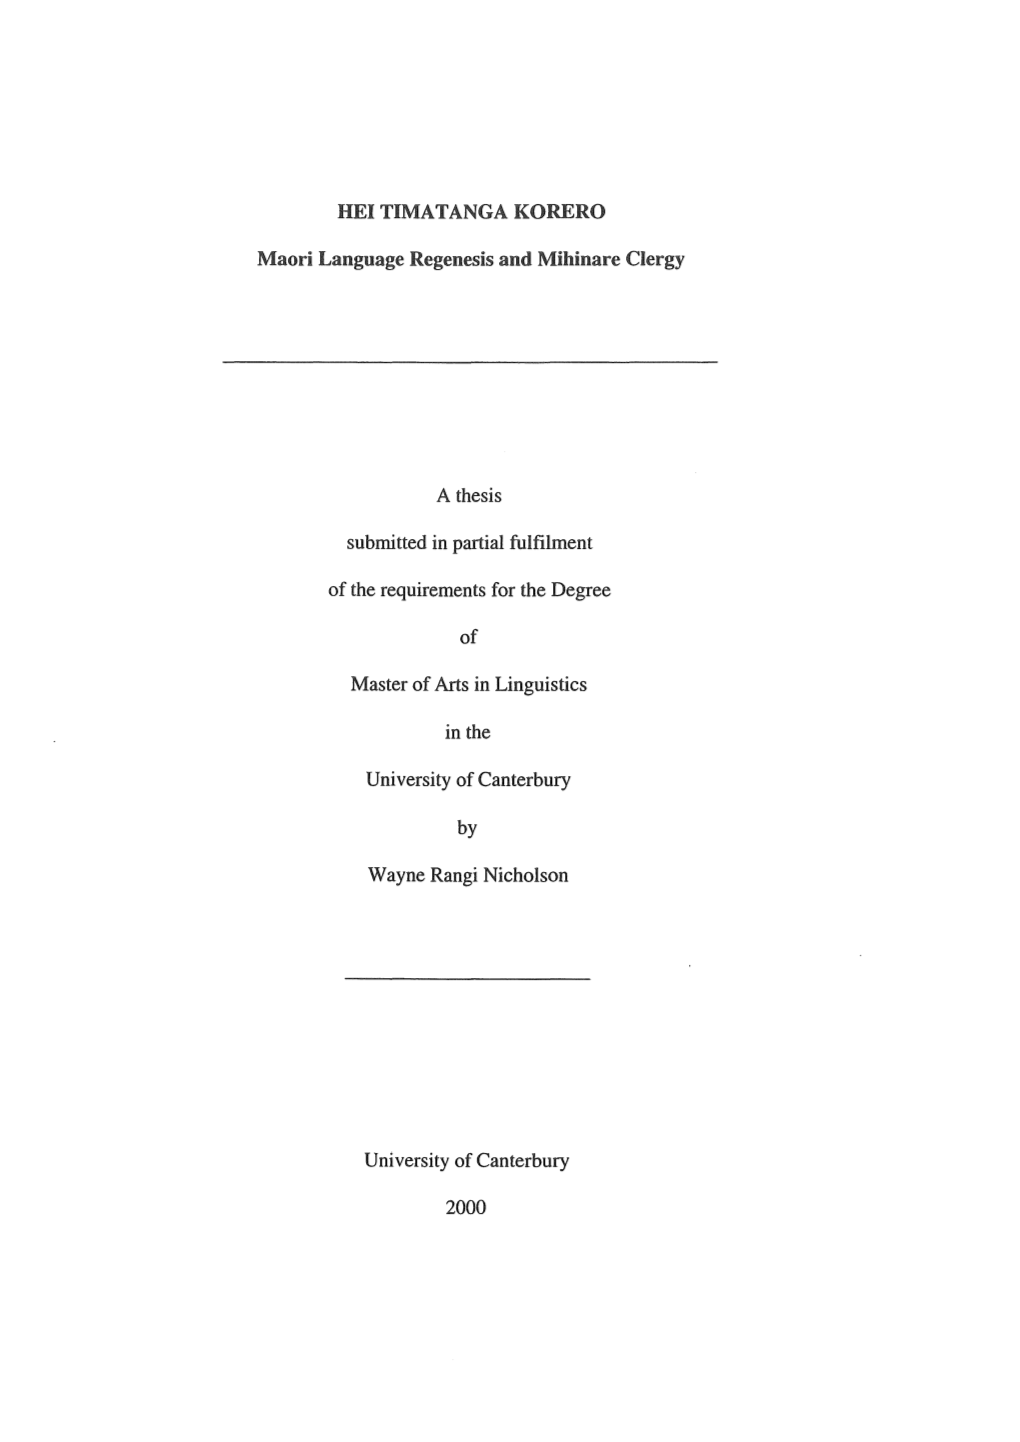 Language Regenesis a Thesis Submitted in Partial Fulfilment of the Re